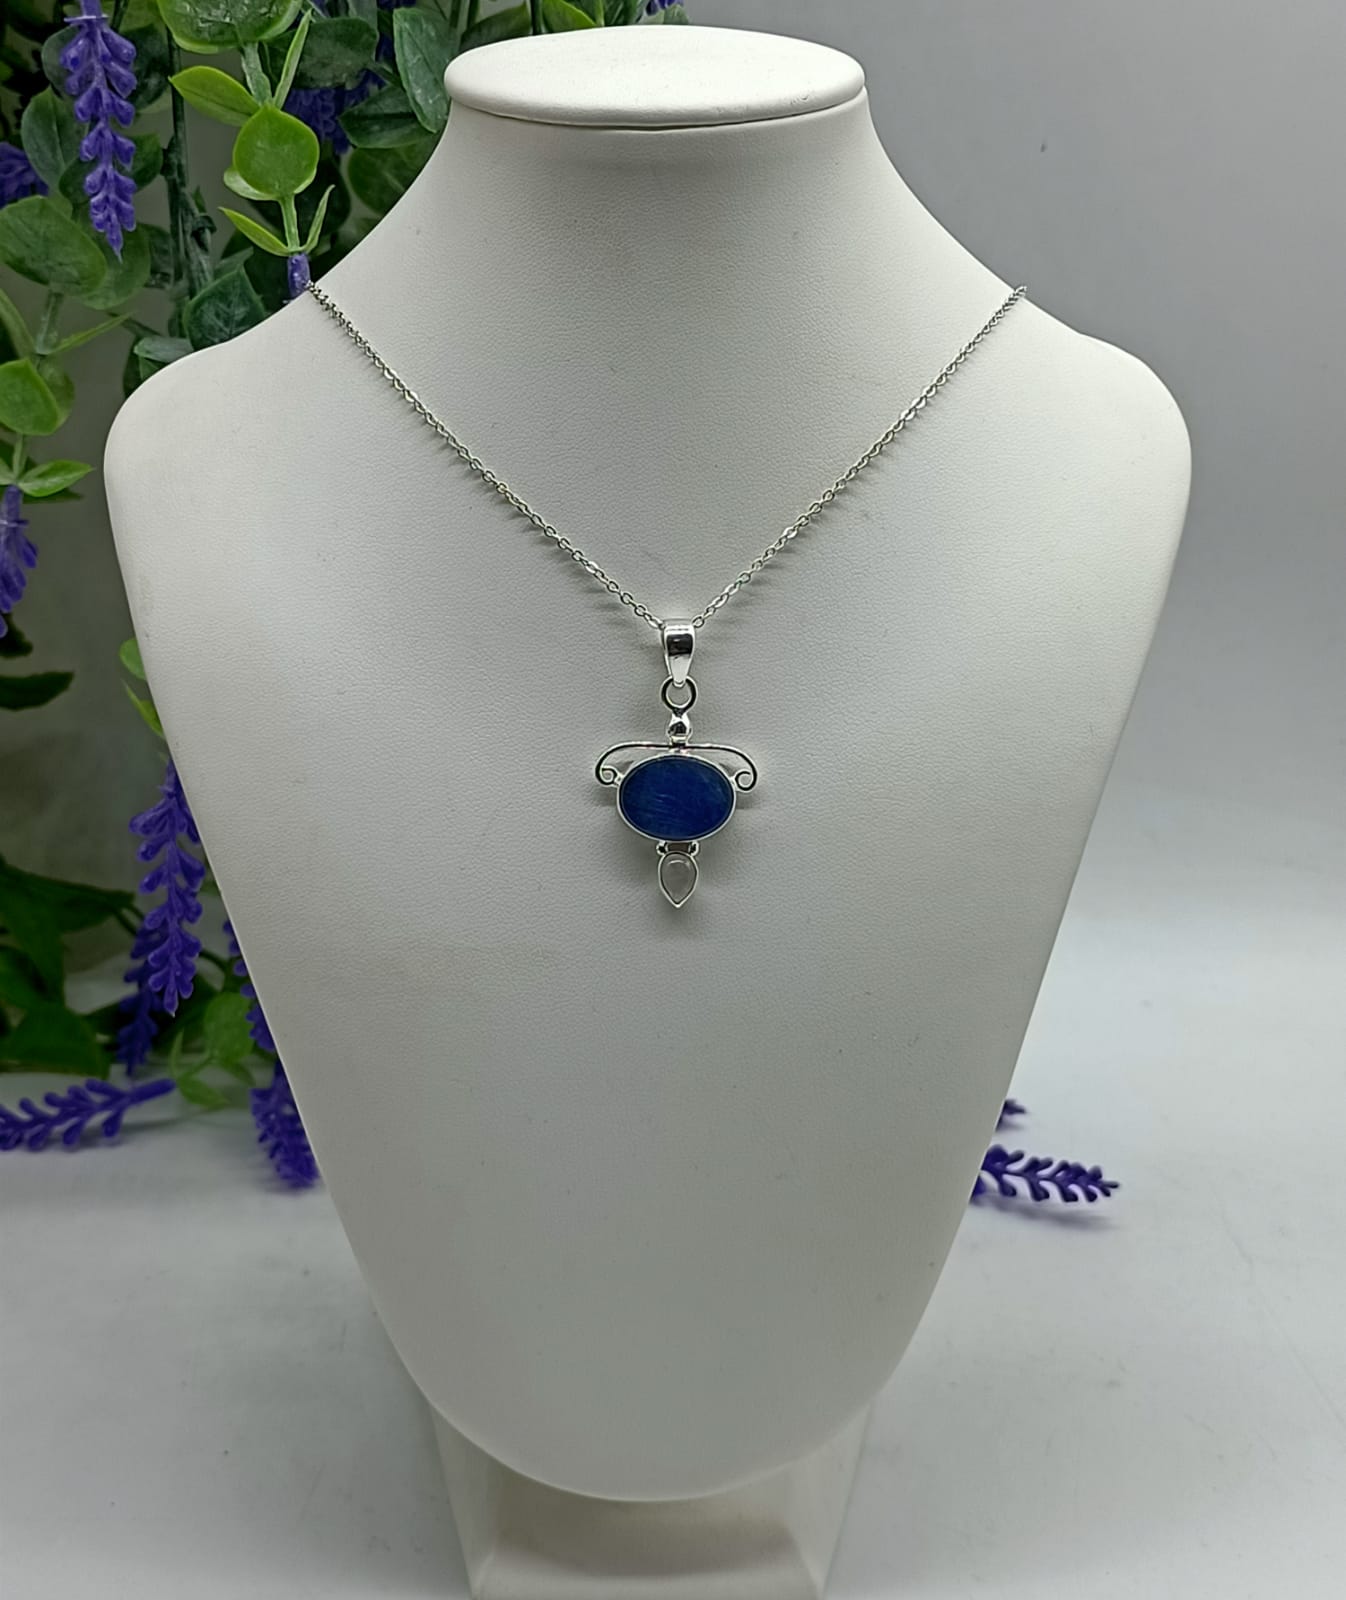 Blue Kyanite with Moonstone in 925 Sterling Silver Pendant (Silver chain included)